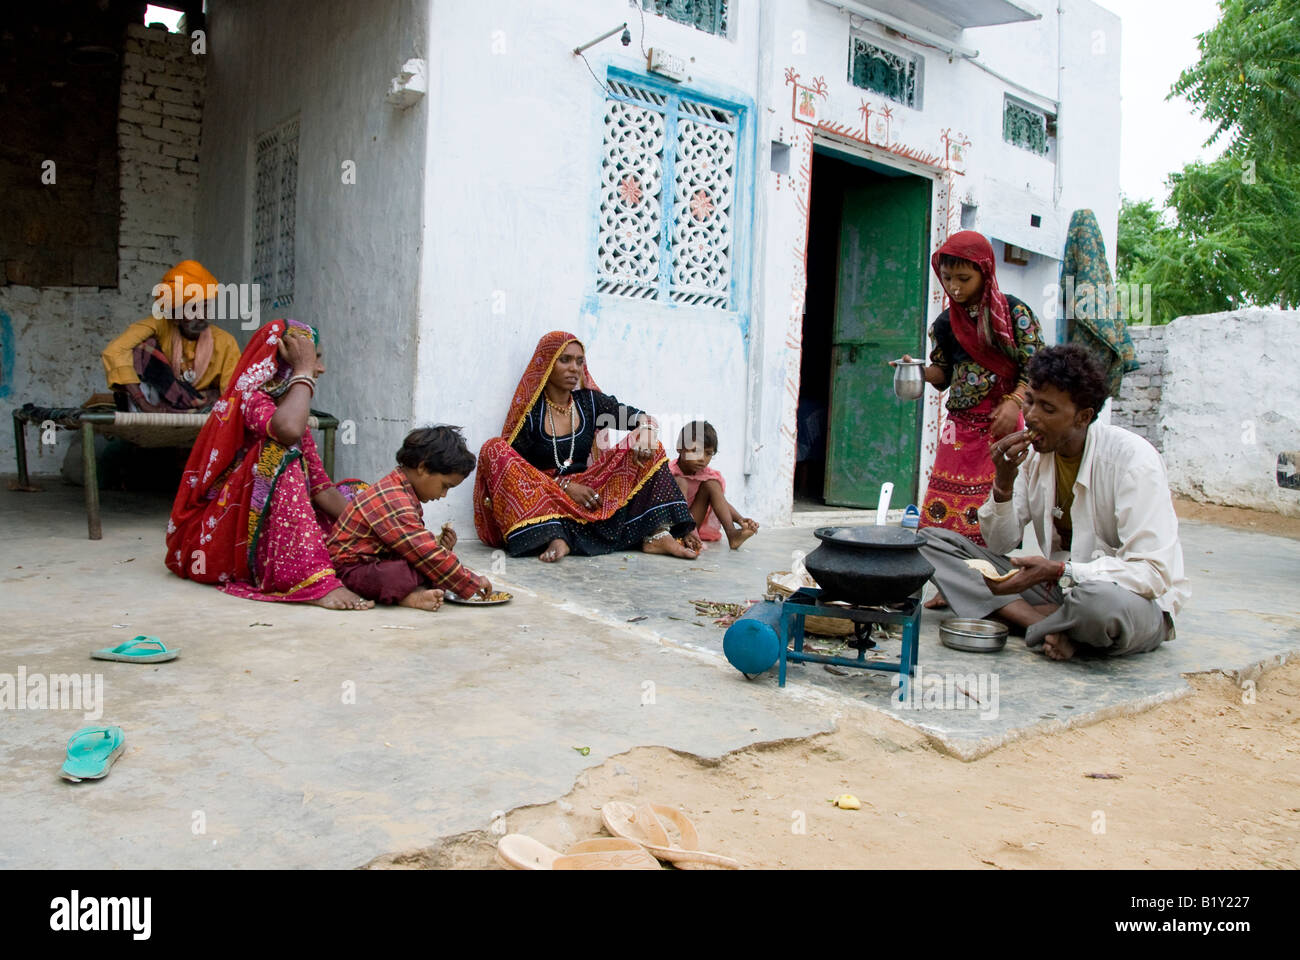 Family cooking food in courtyard of a house in Rajasthan, India. Stock Photo